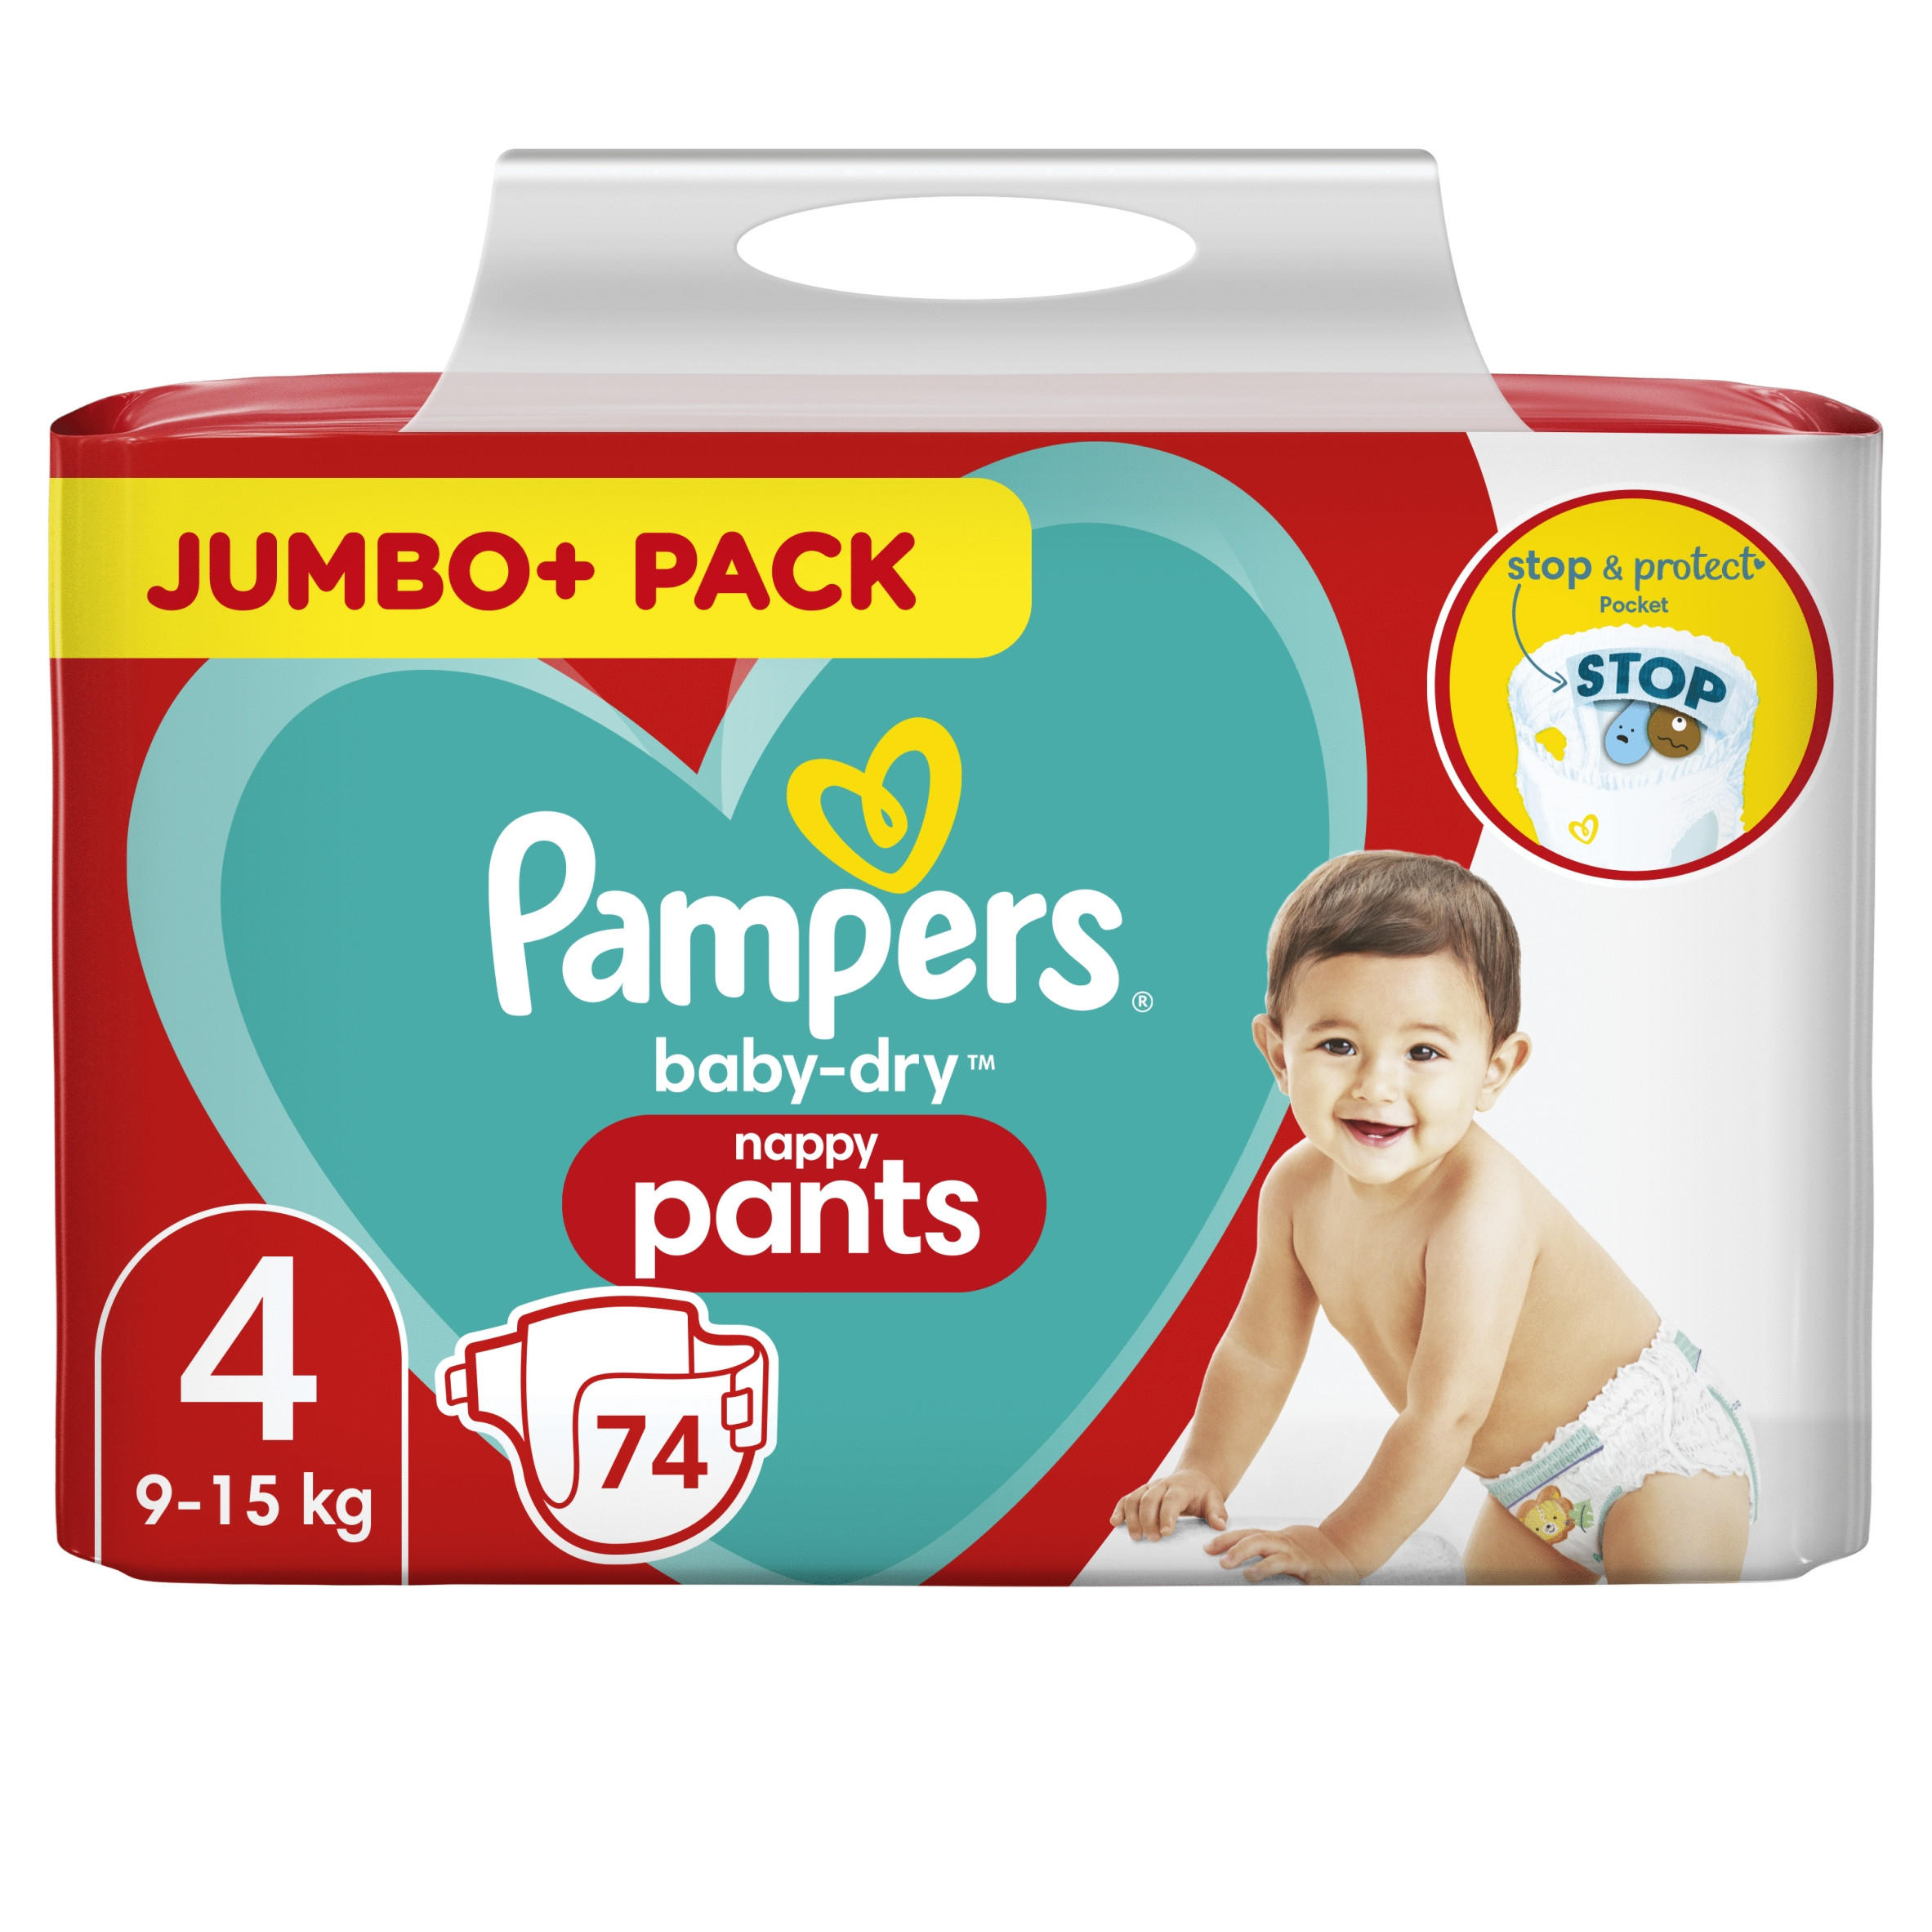 Pampers Baby-Dry Nappy Pants Size 4, 74 Nappies, 9kg-15kg, Jumbo+ Pack ...